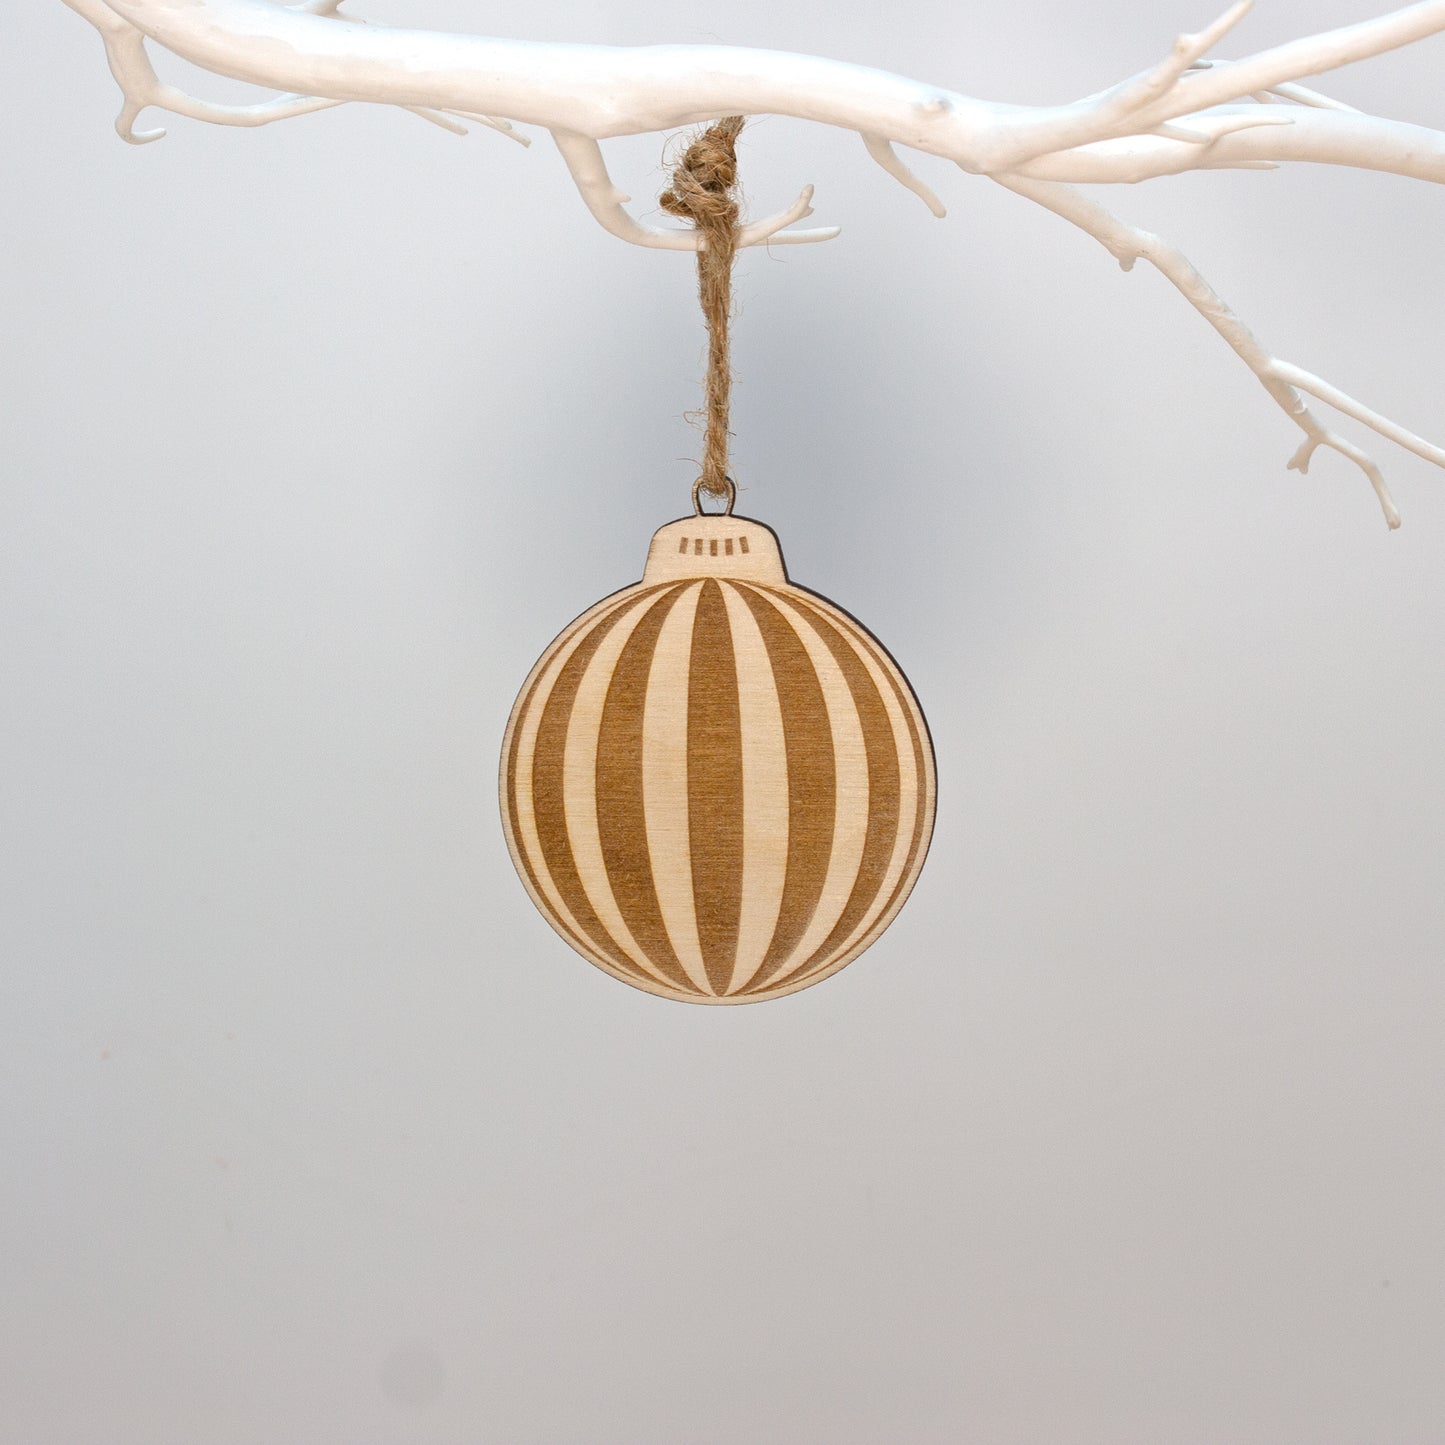 Wooden Vintage Christmas Baubles, Set of 4 Retro Tree Ornaments